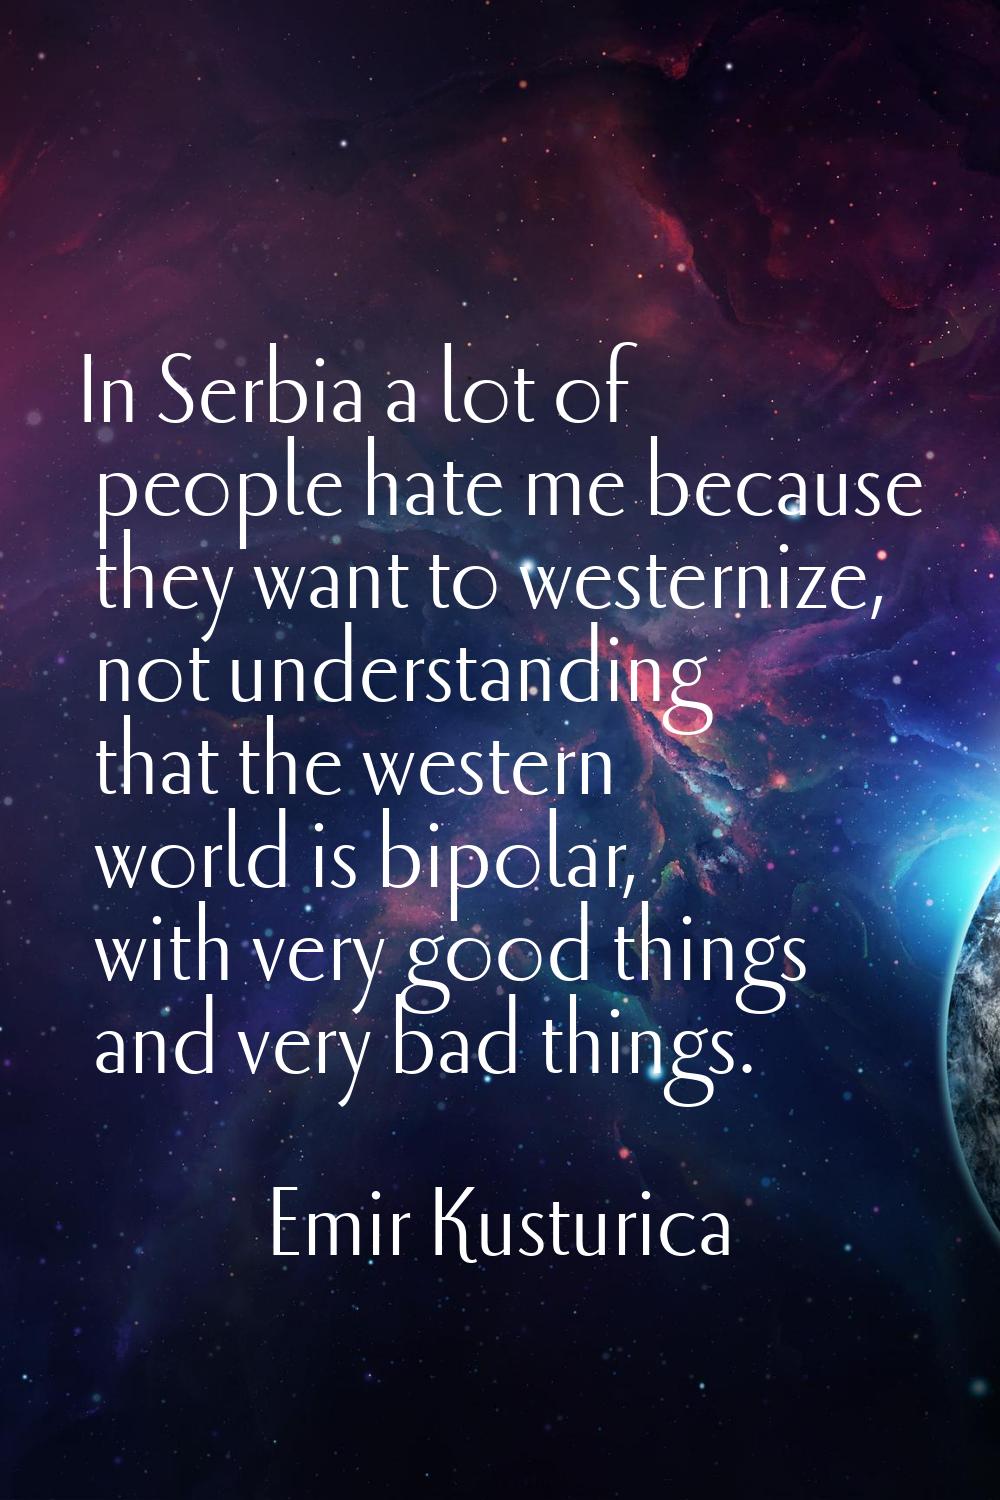 In Serbia a lot of people hate me because they want to westernize, not understanding that the weste